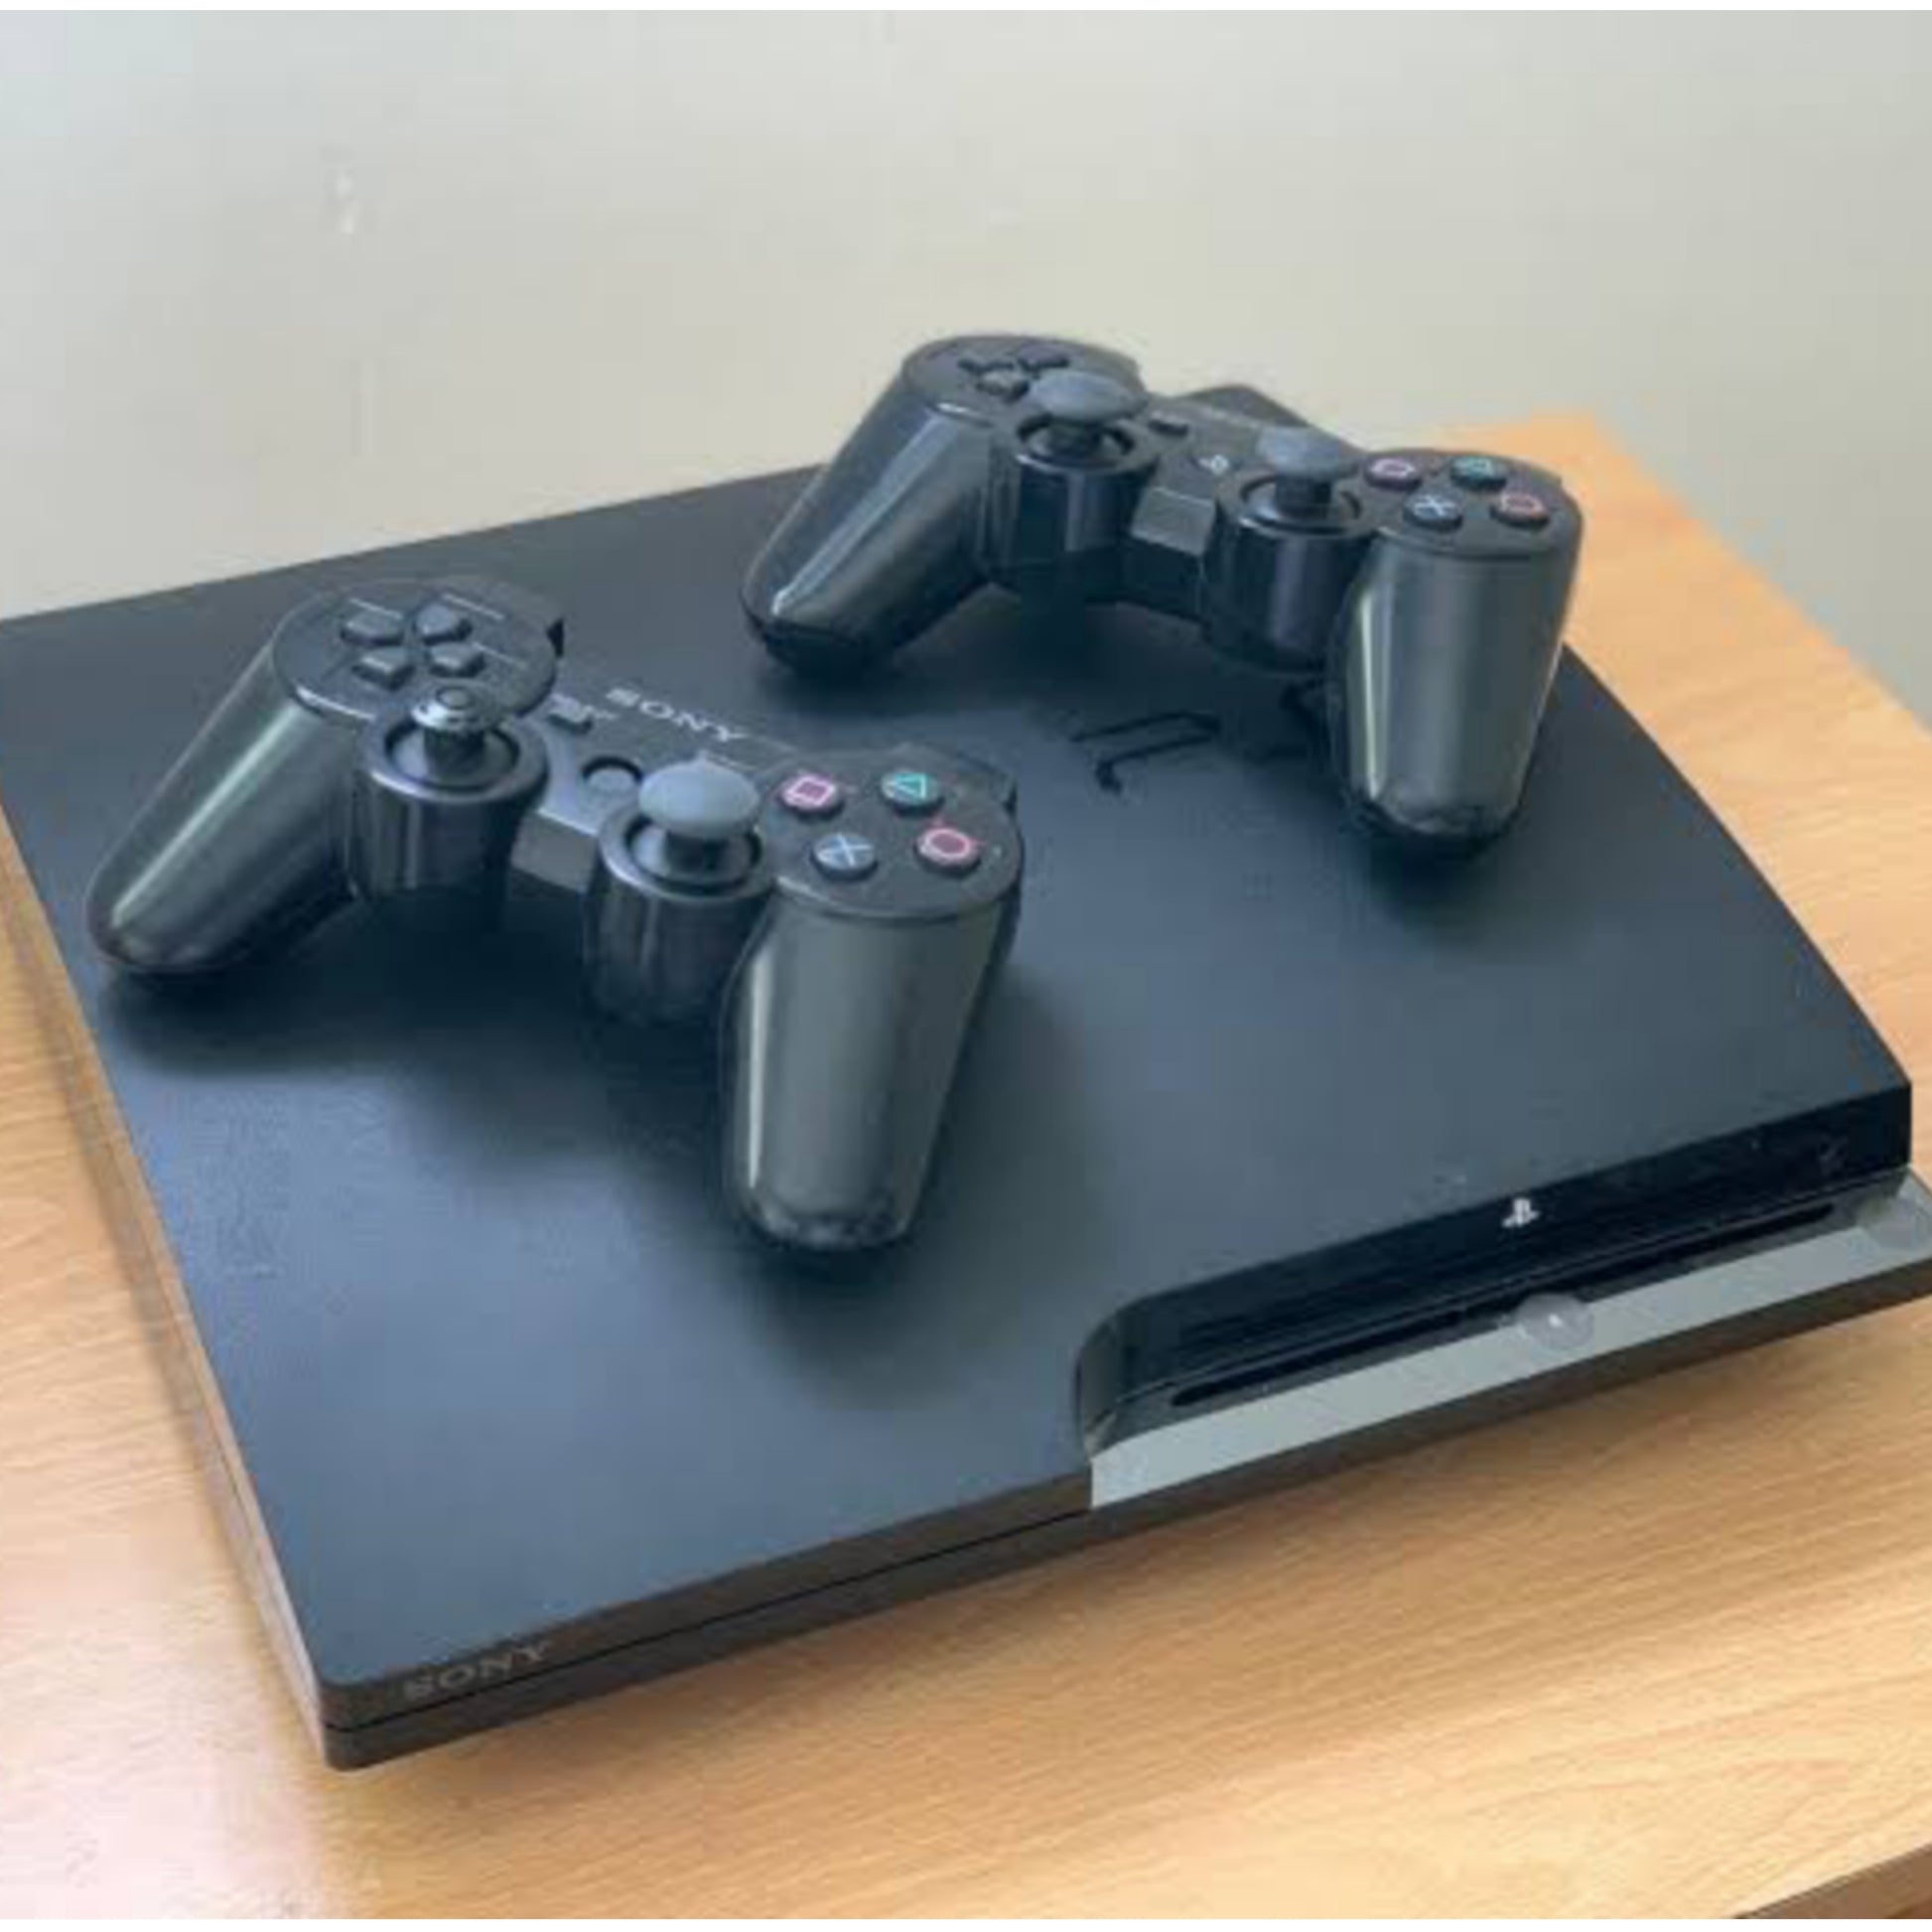 UK Used PS3 (Playstation 3) Slim 160GB Game Console Complete Set with Extra Controller and 10 Titles